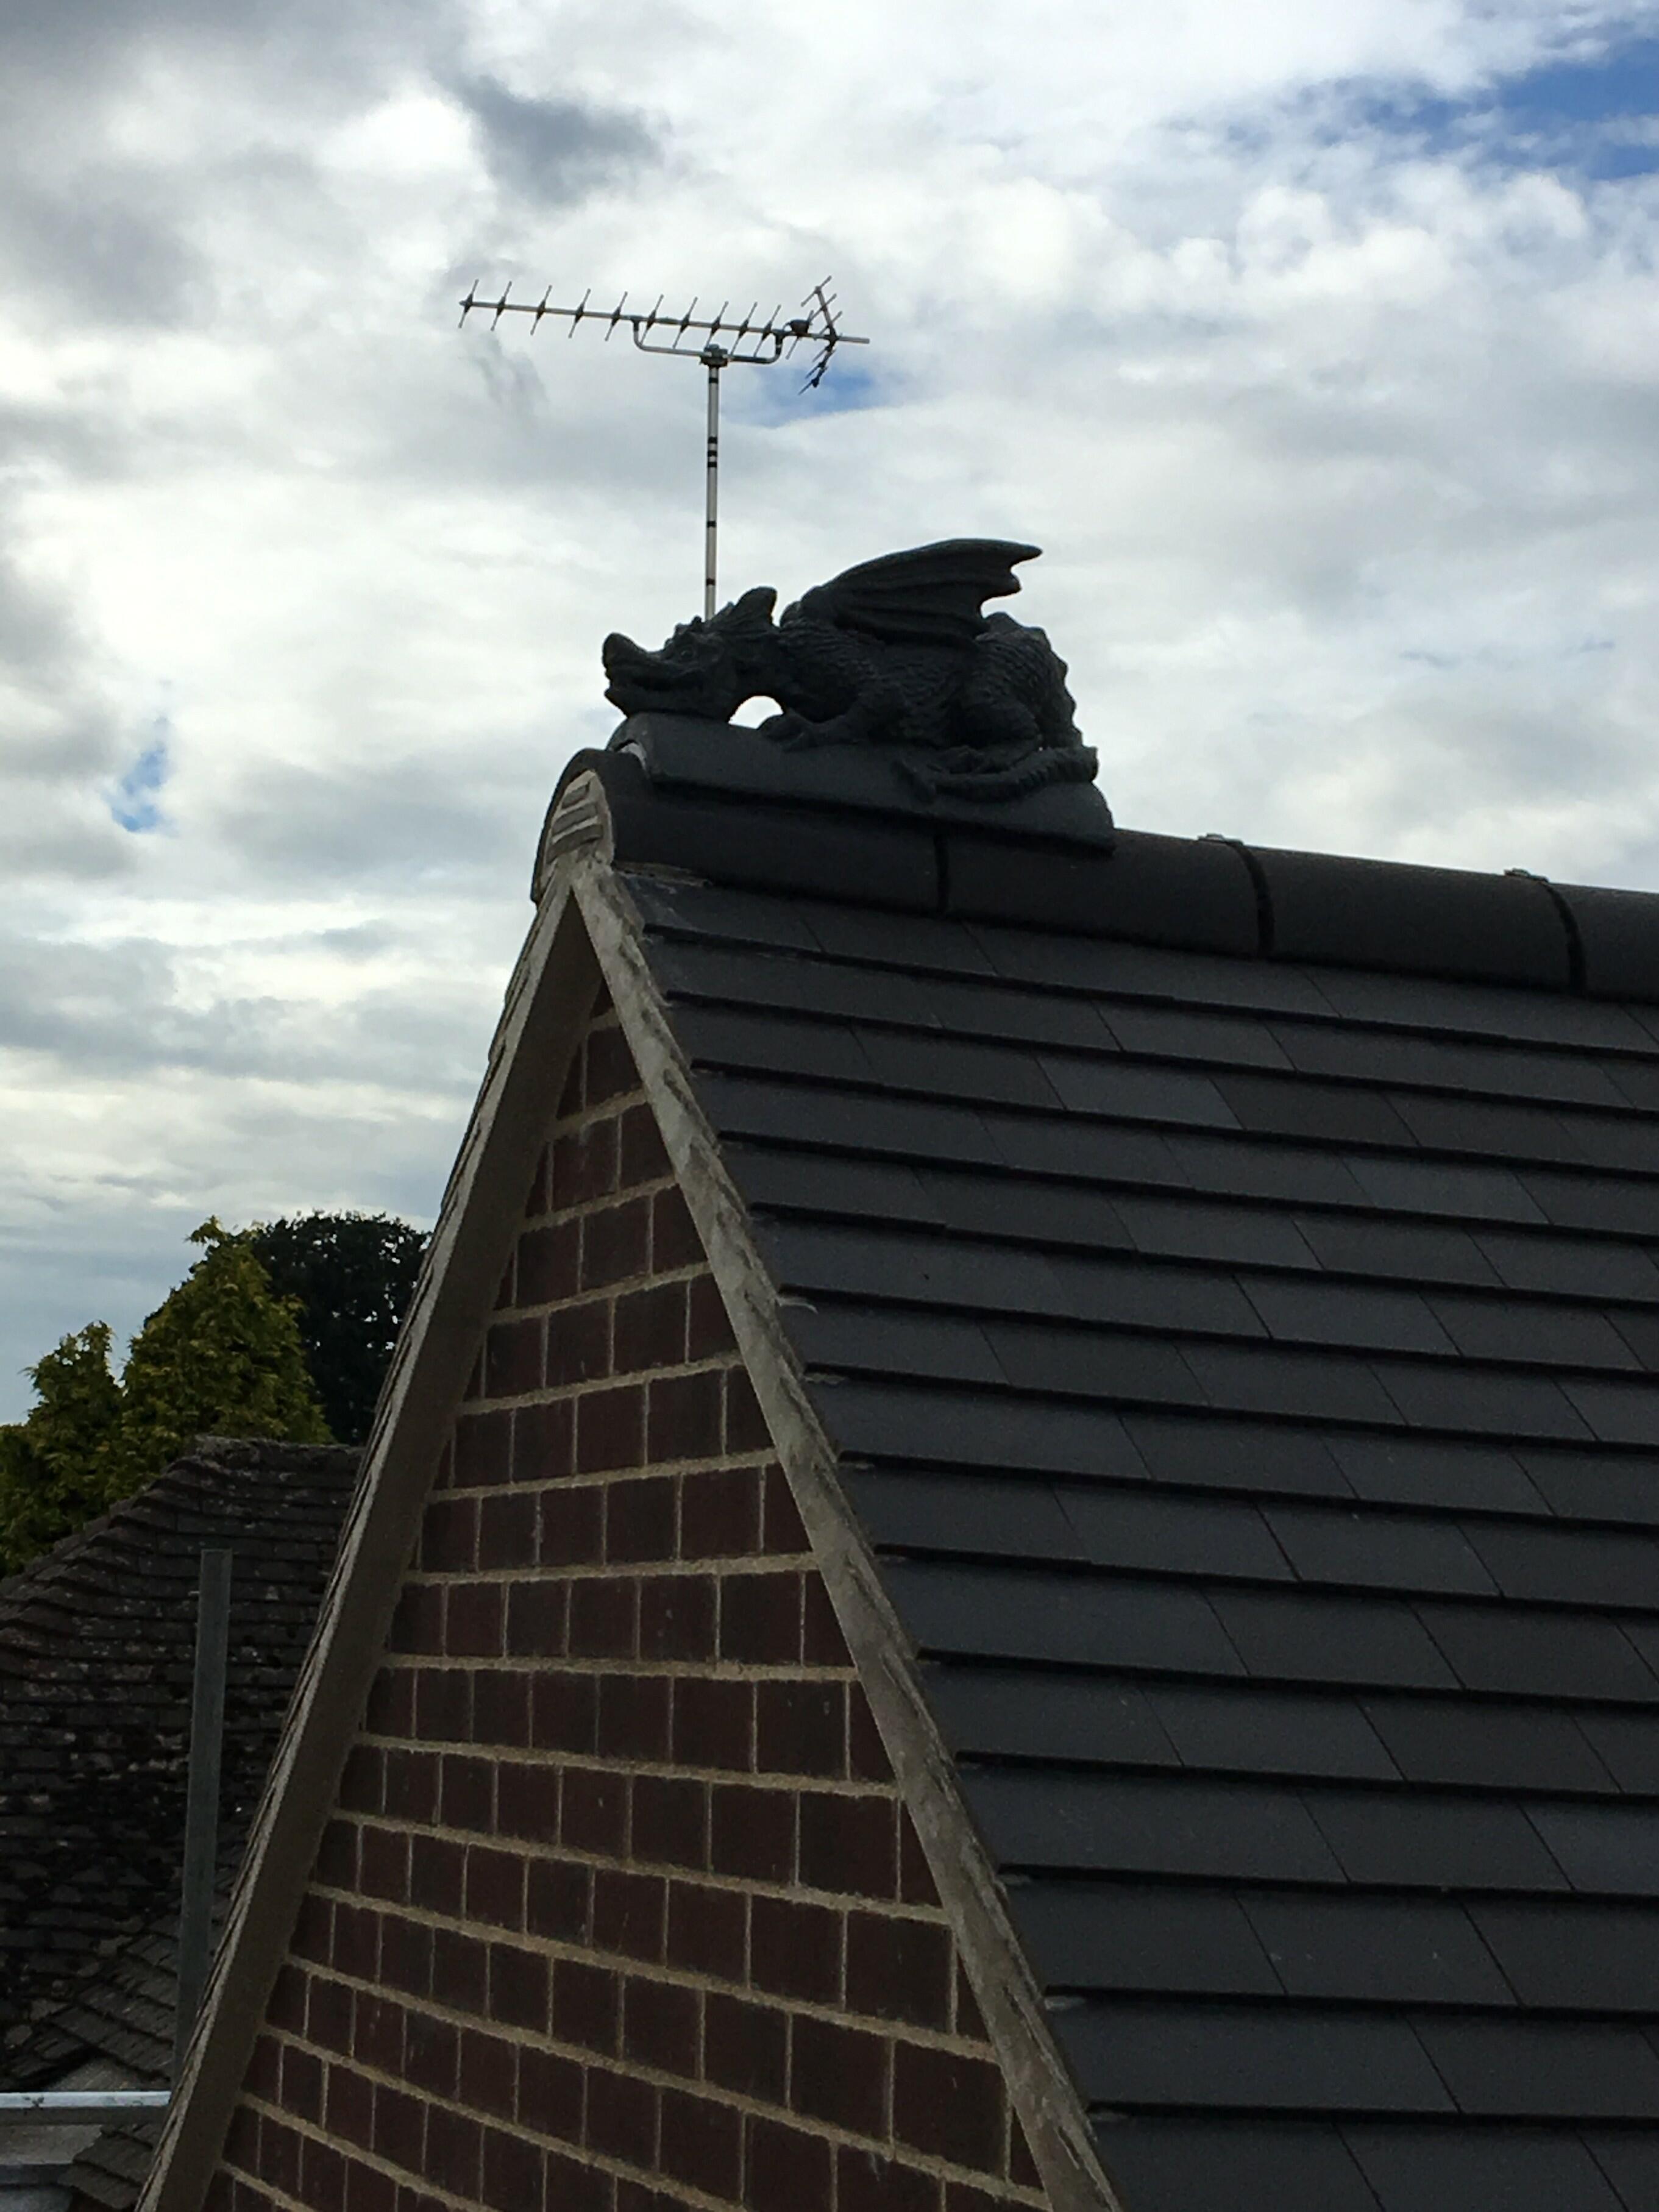 Staffordshire blue colour match dragon finial installed on top of another ridge tile